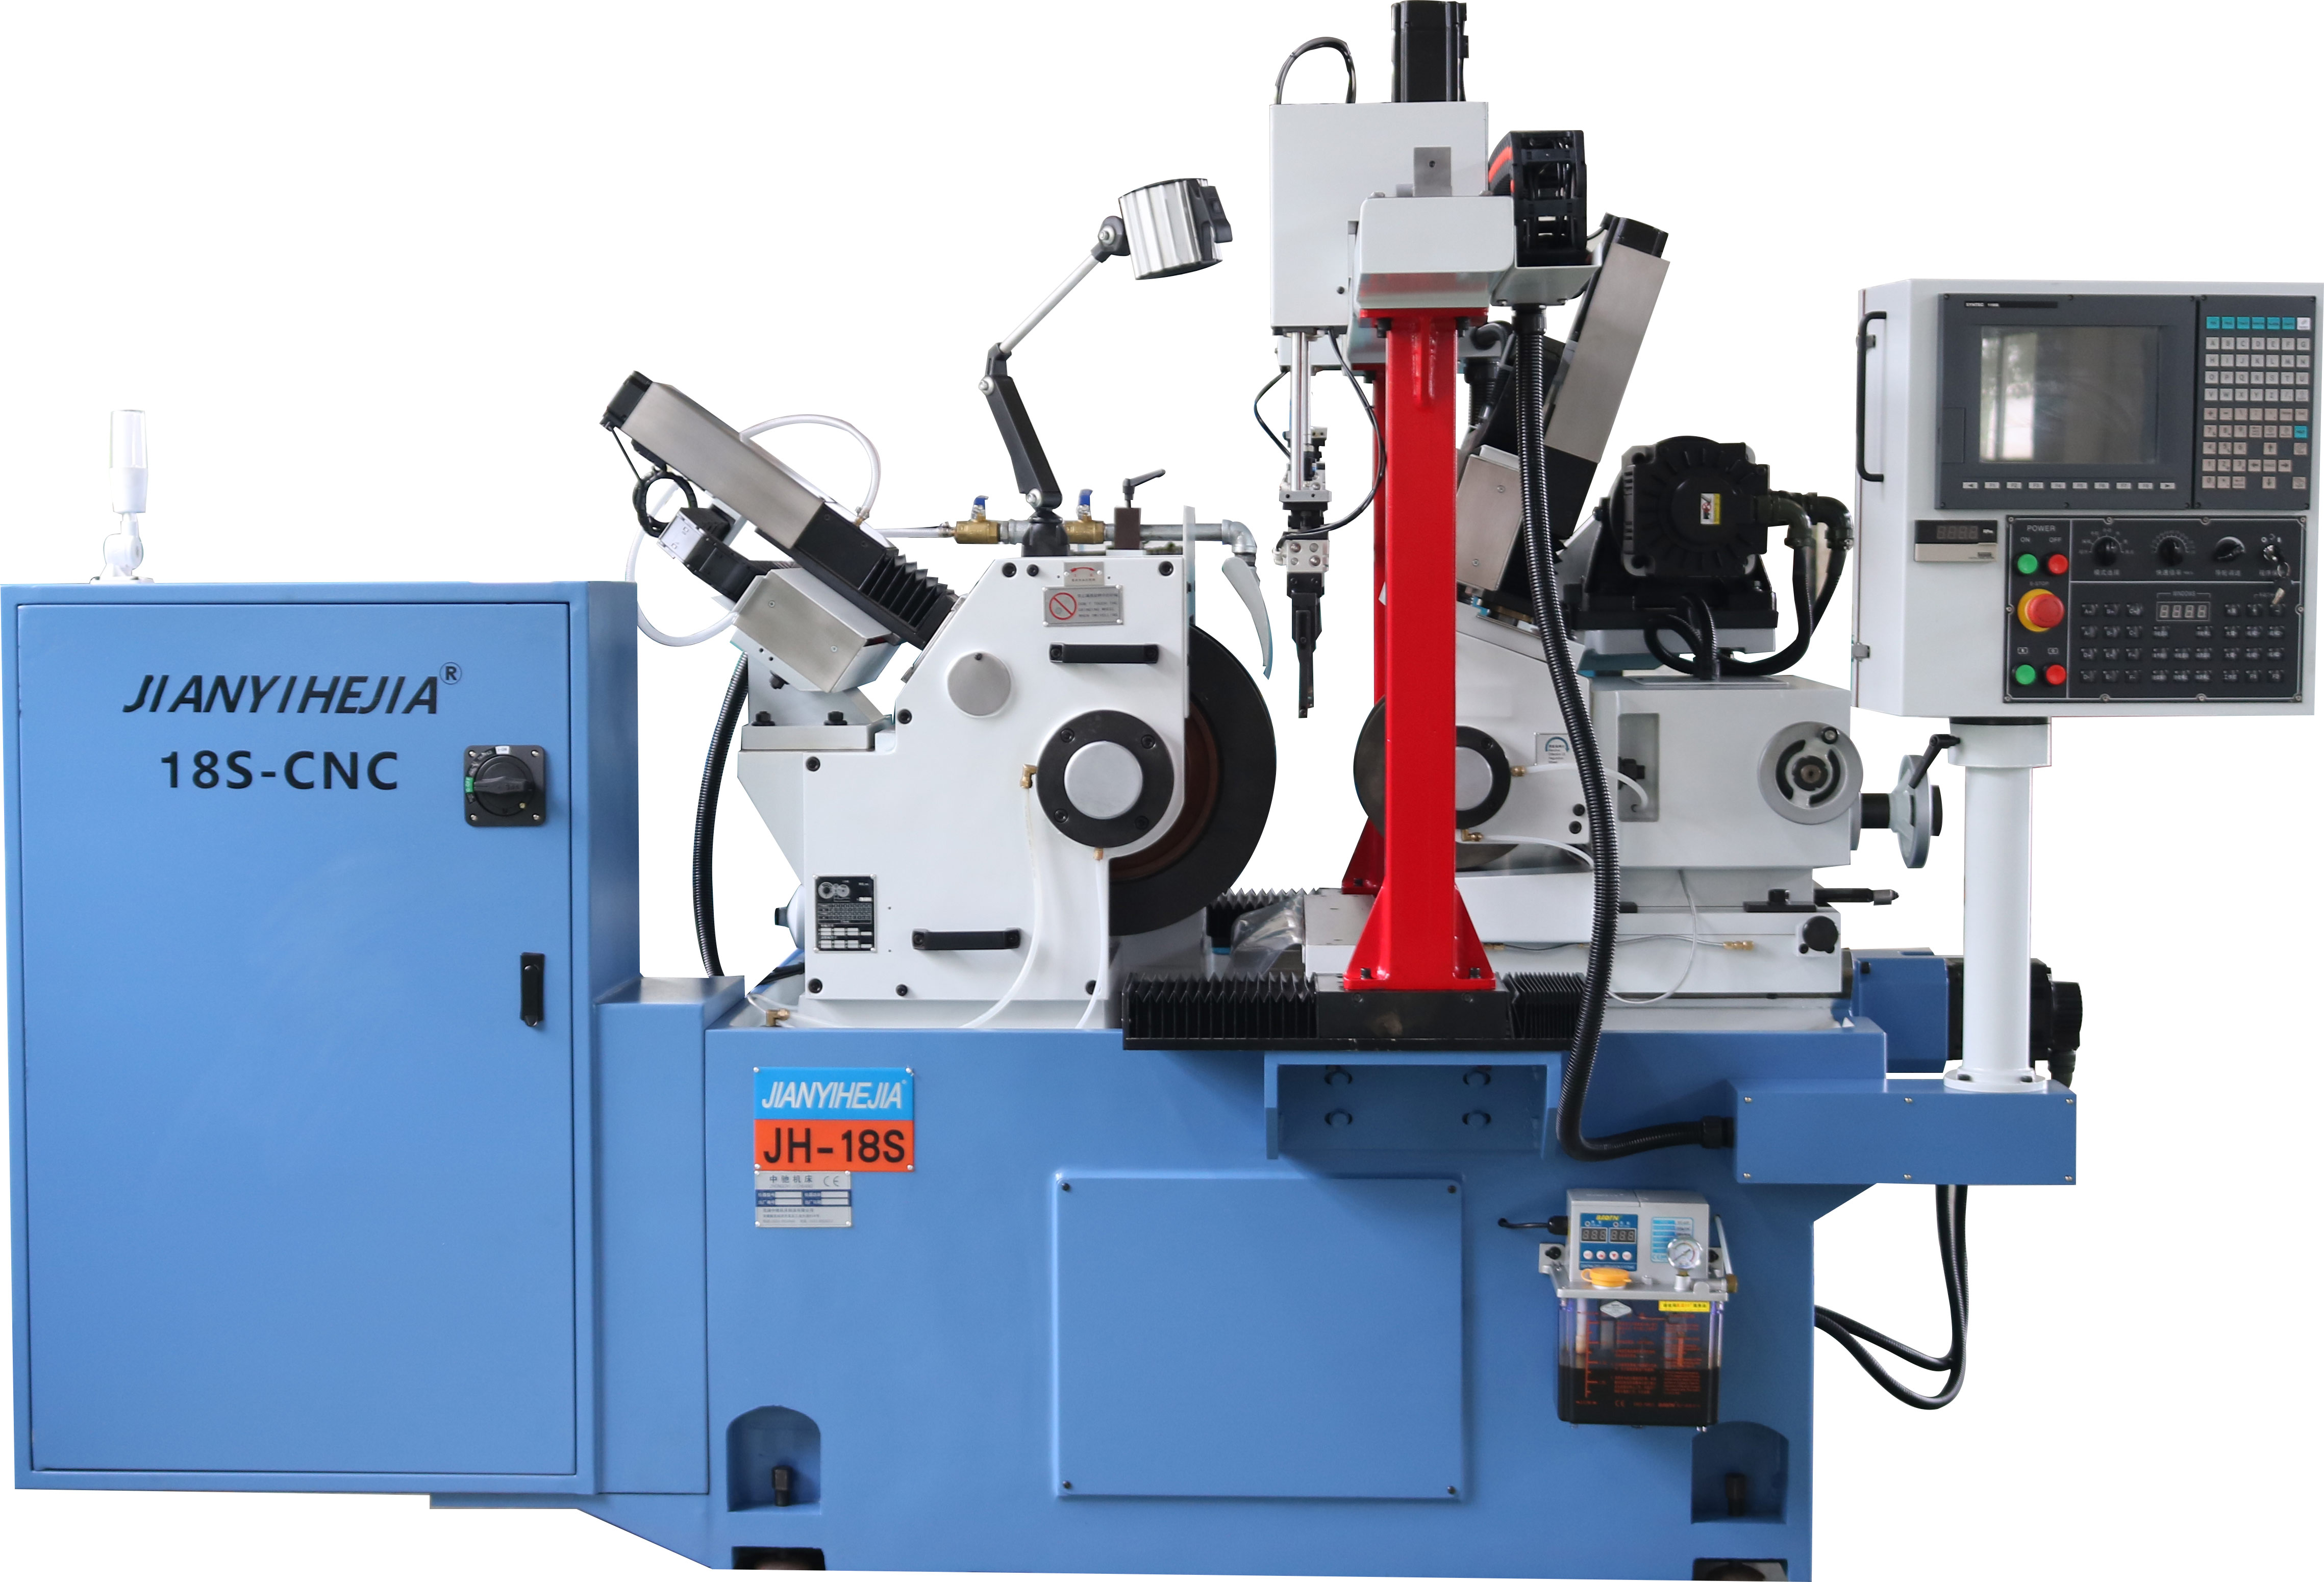 Reasonable selection method for high-precision centerless grinding machines